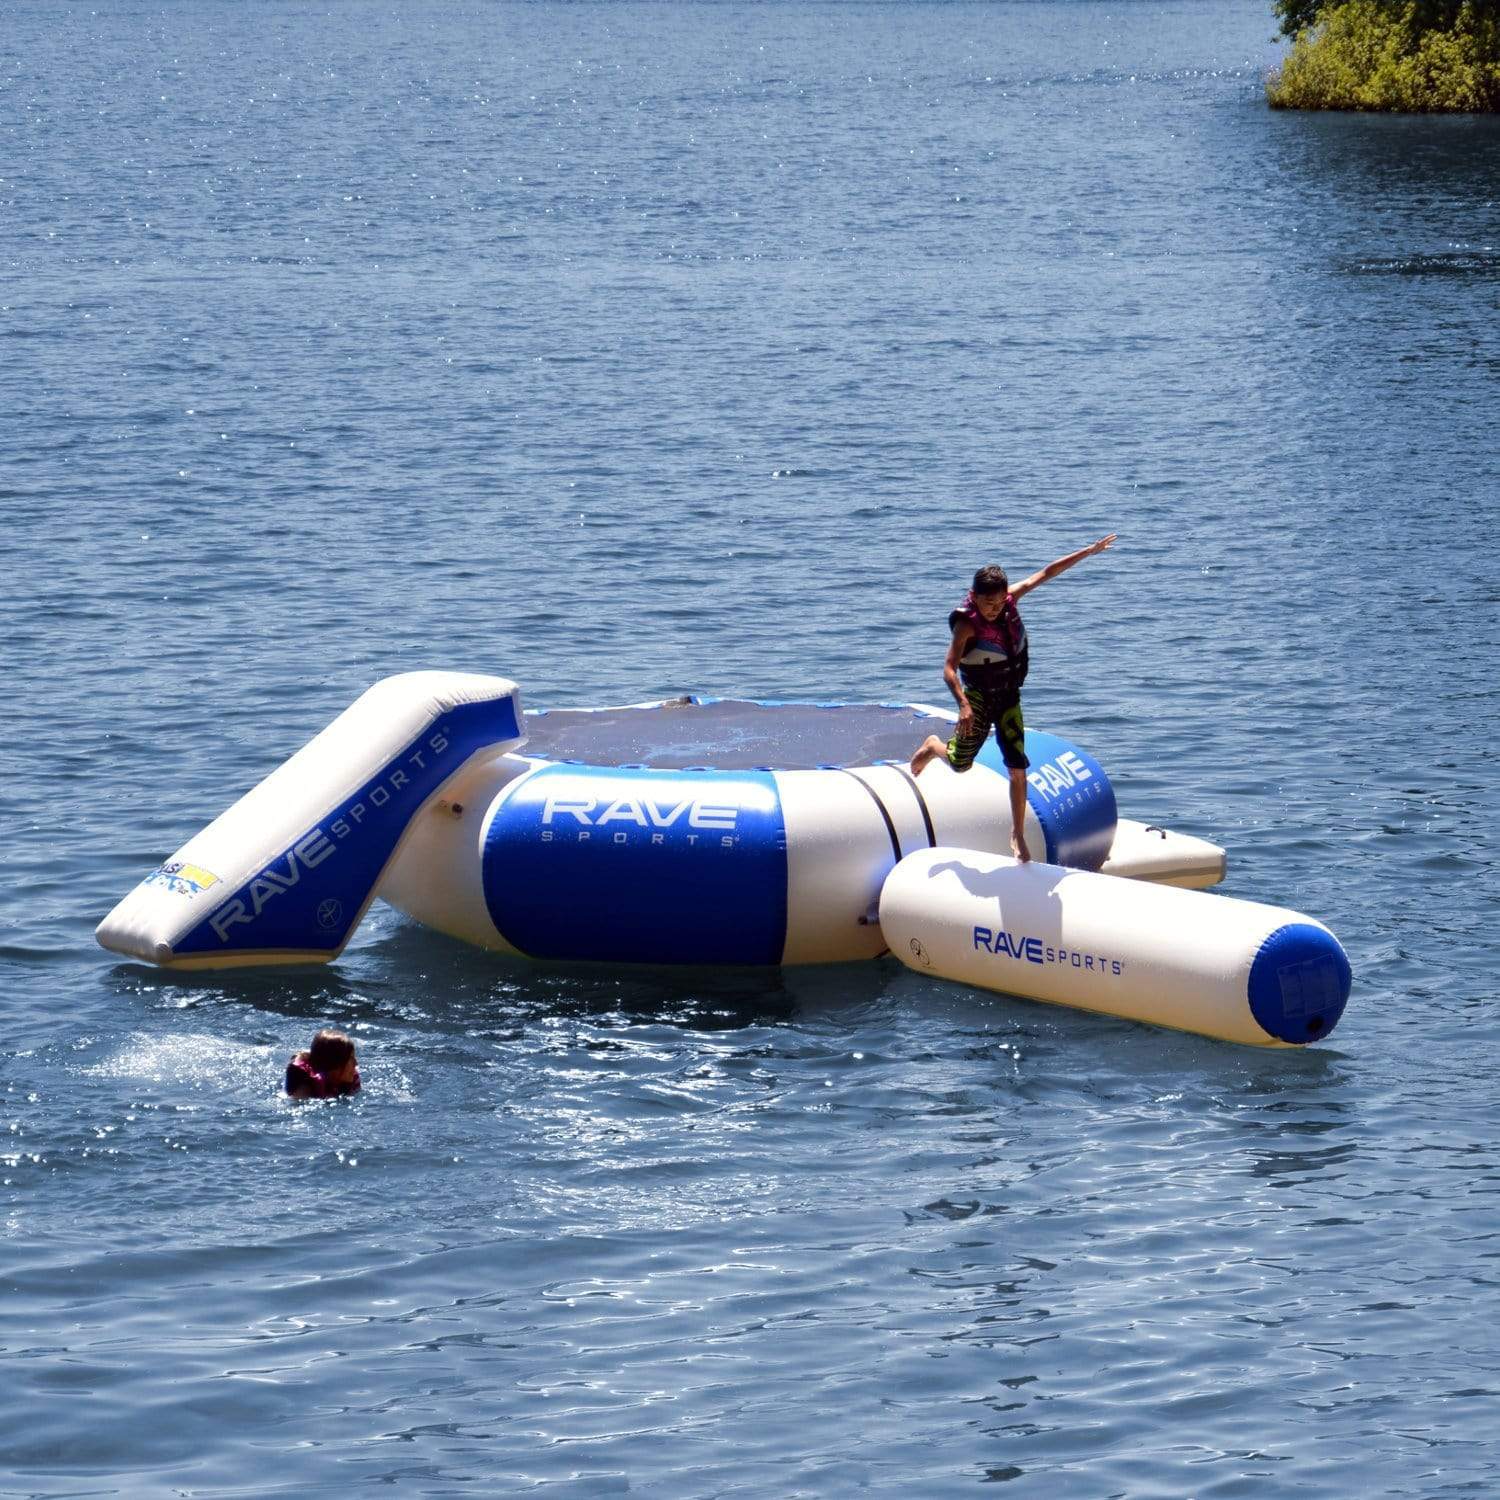 RAVE Water Bouncers - Reinforced Water Trampoline Splash Zone Plus 12' with slide and log